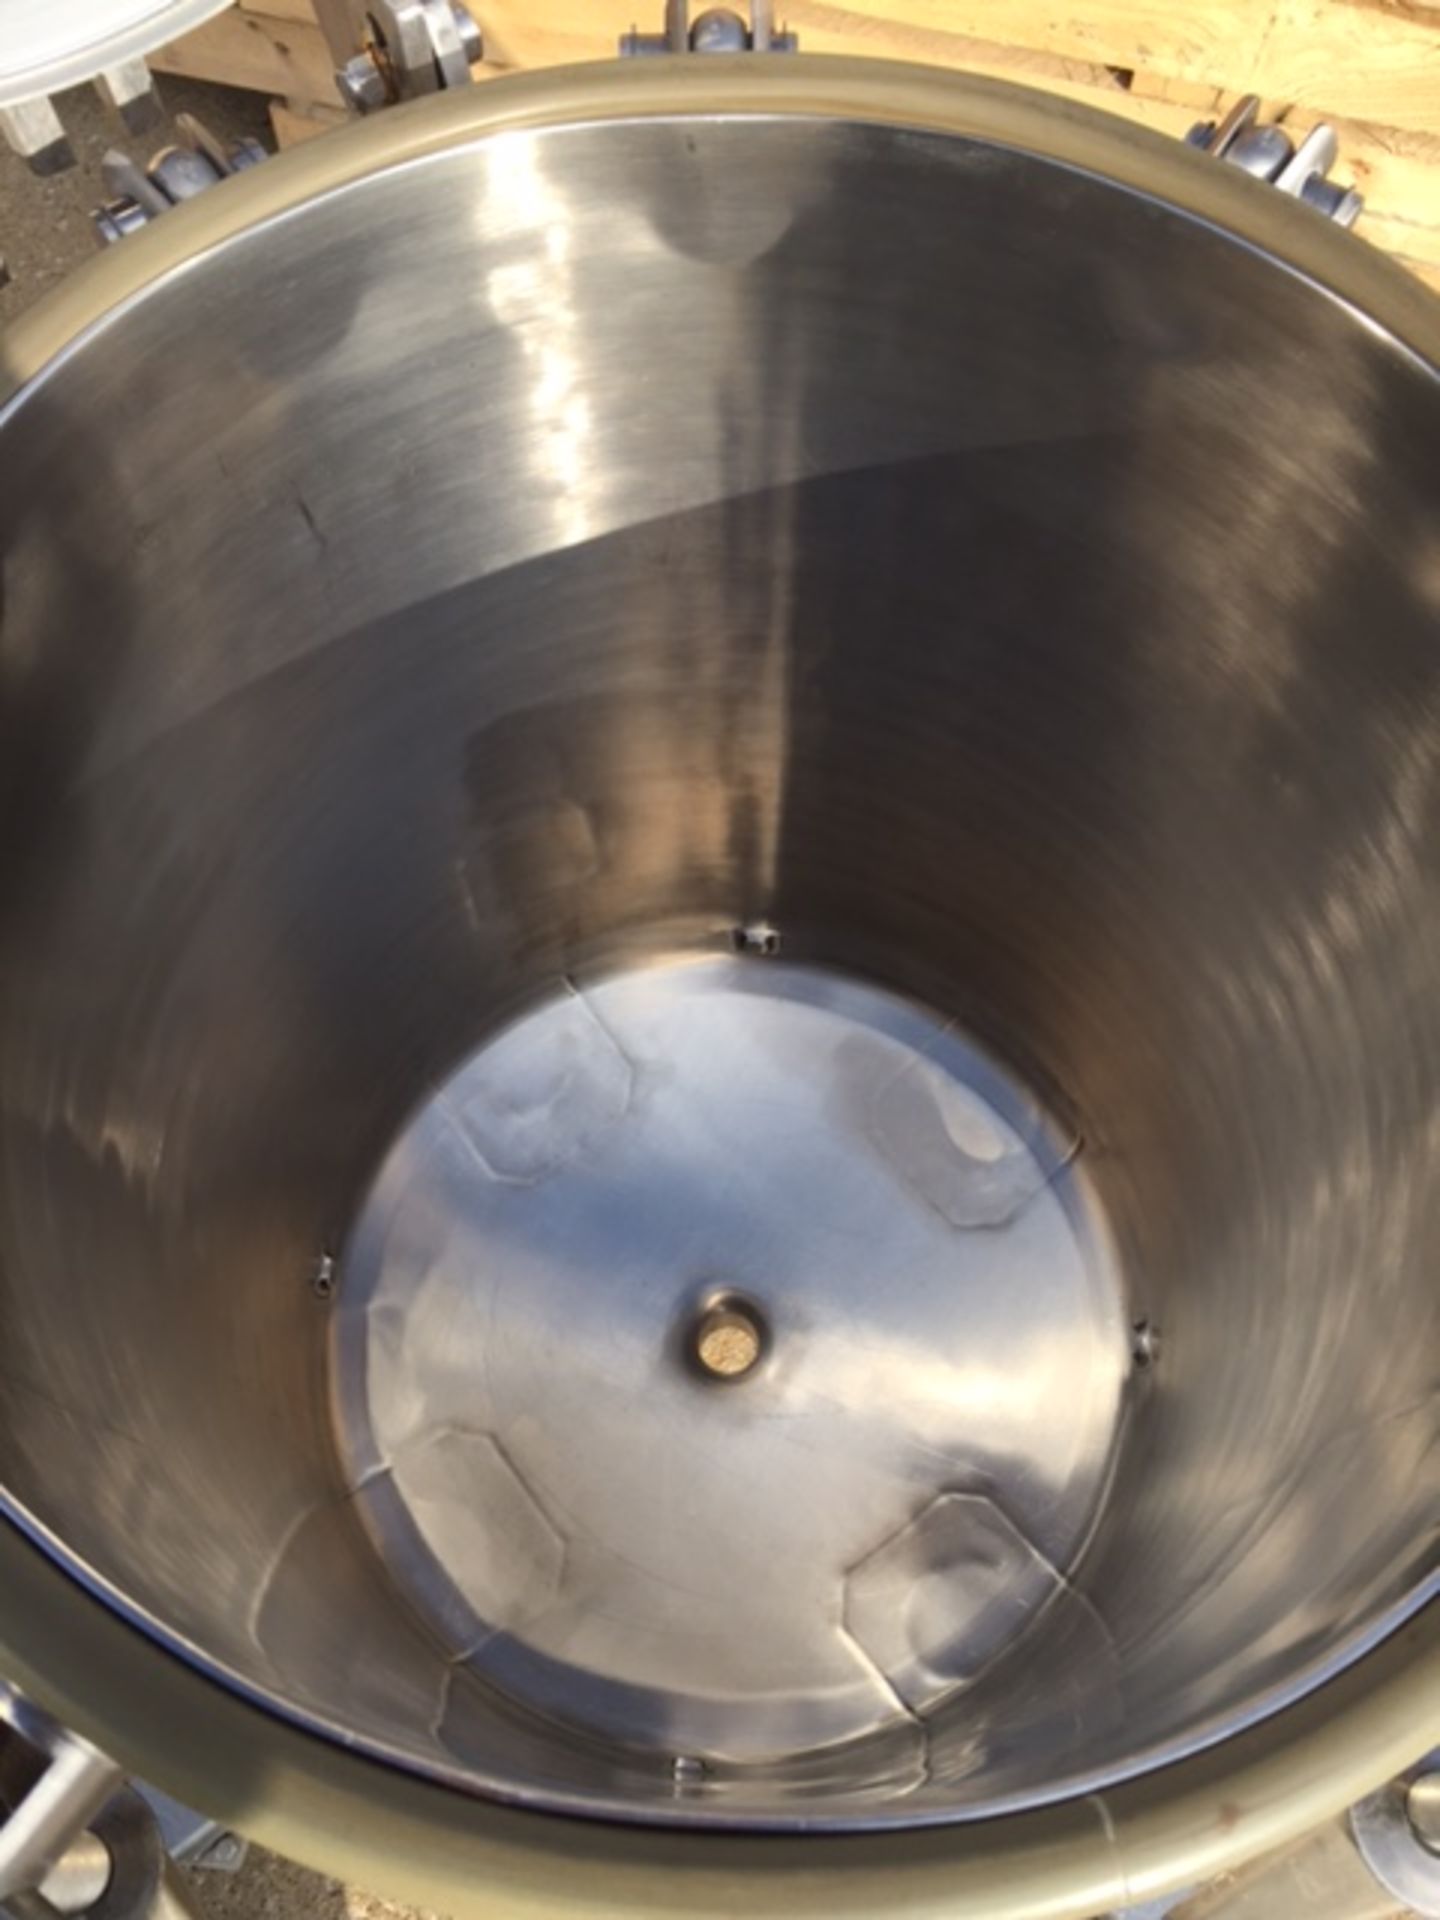 Pressure Tank, 150 Liter, 316 SS, 100 PSIG at 100 Deg. F, Certified by Precision Stainless Inc. - Image 5 of 6